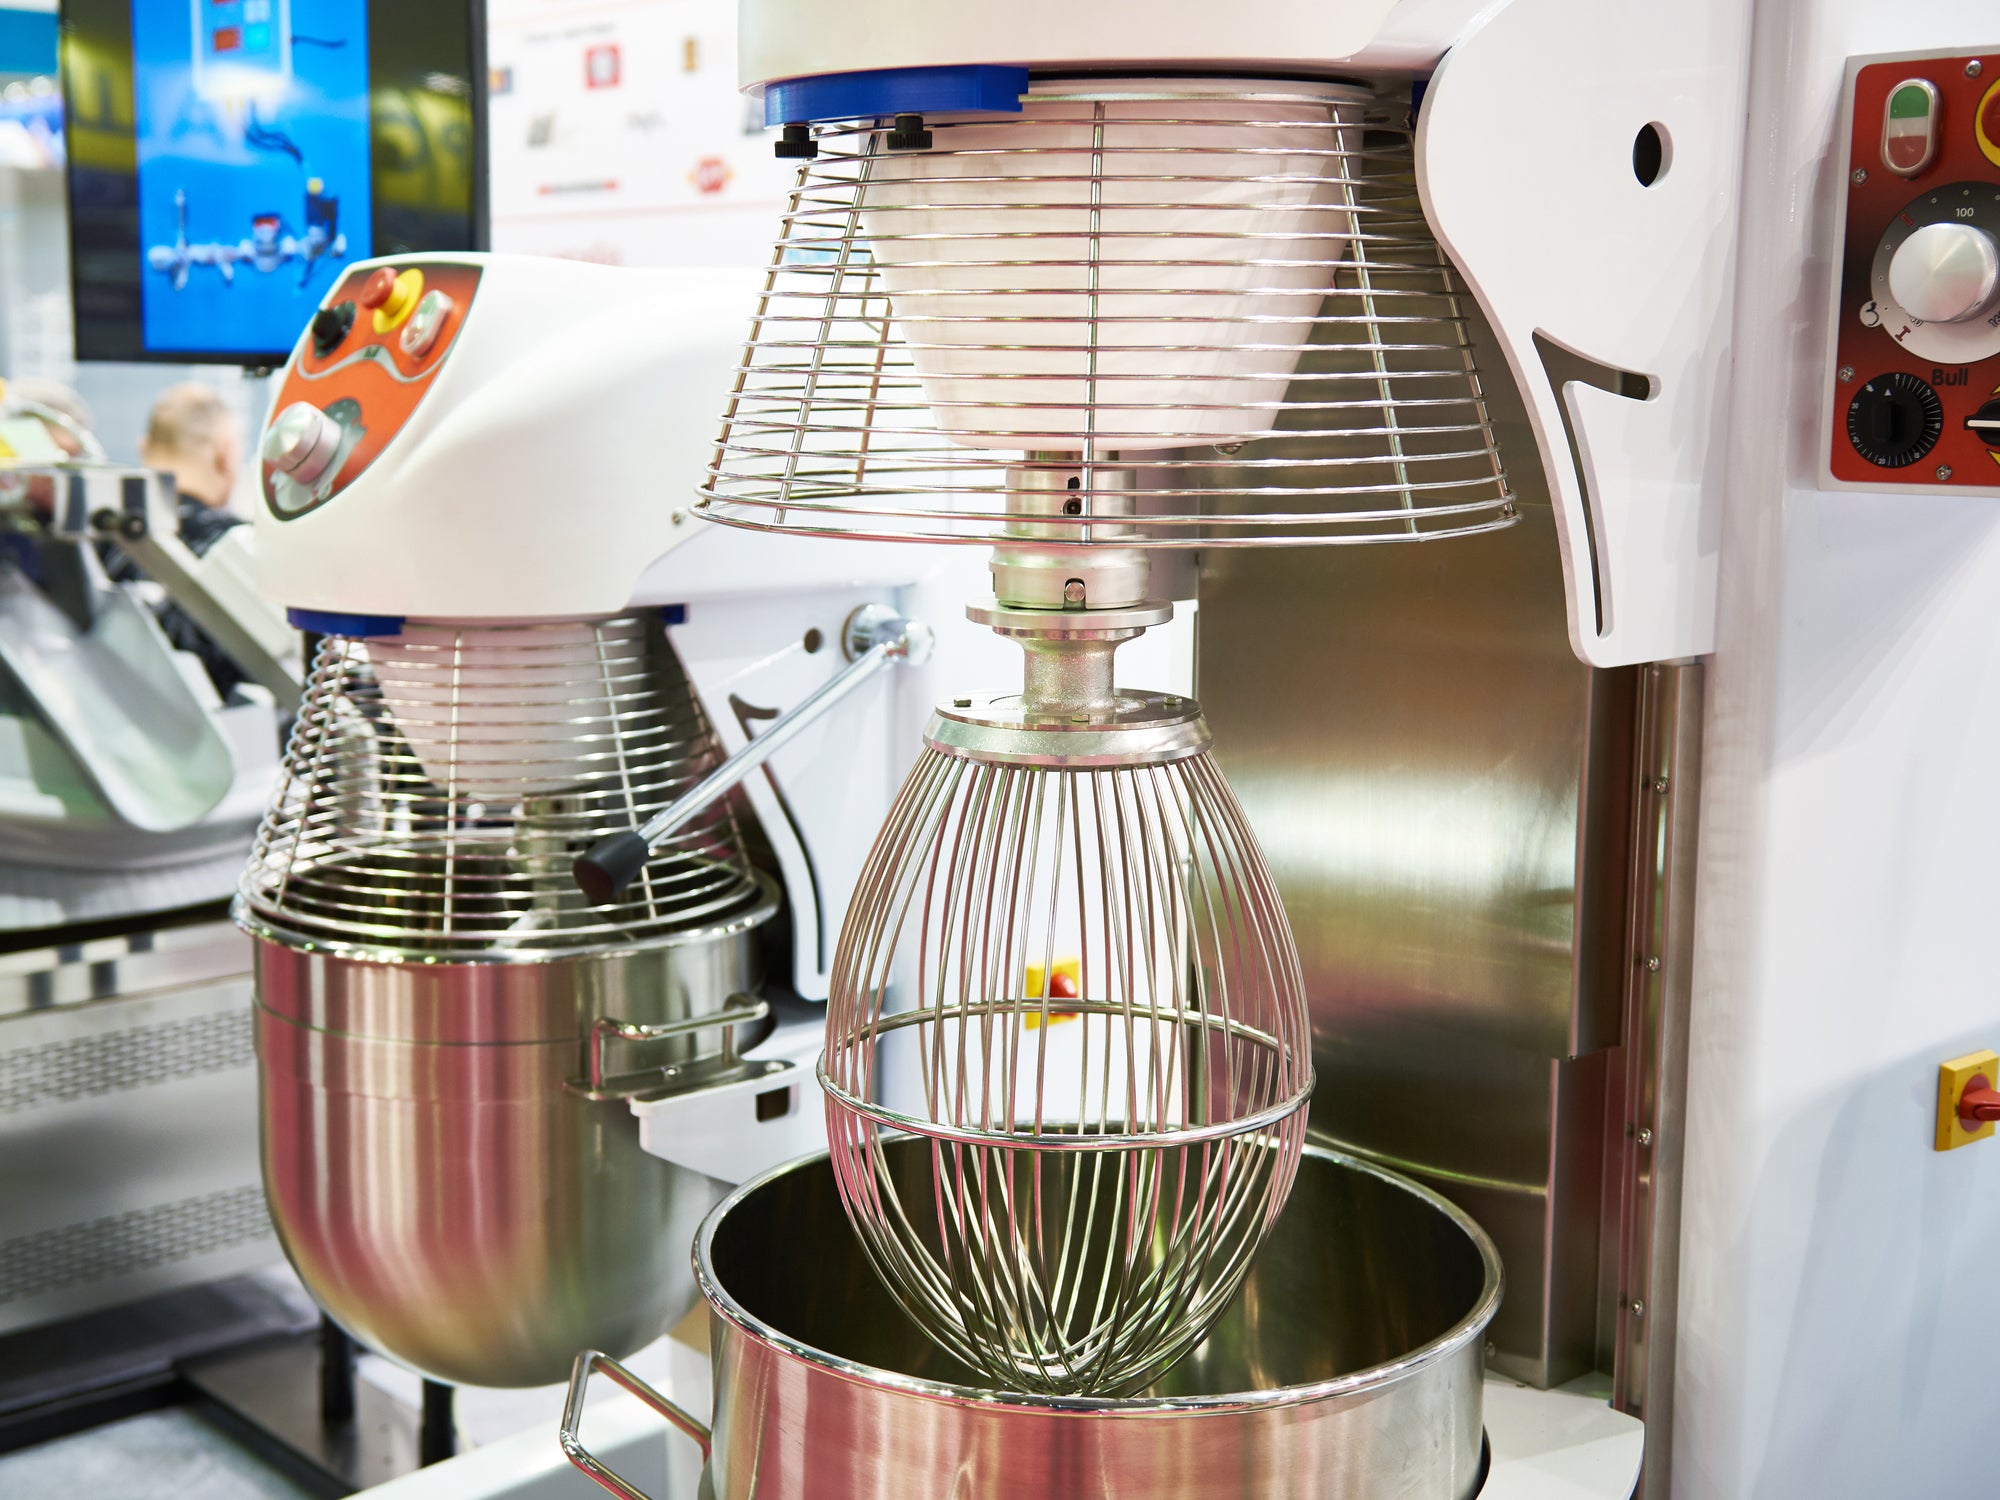 Commercial planetary mixer machines with bowl guard